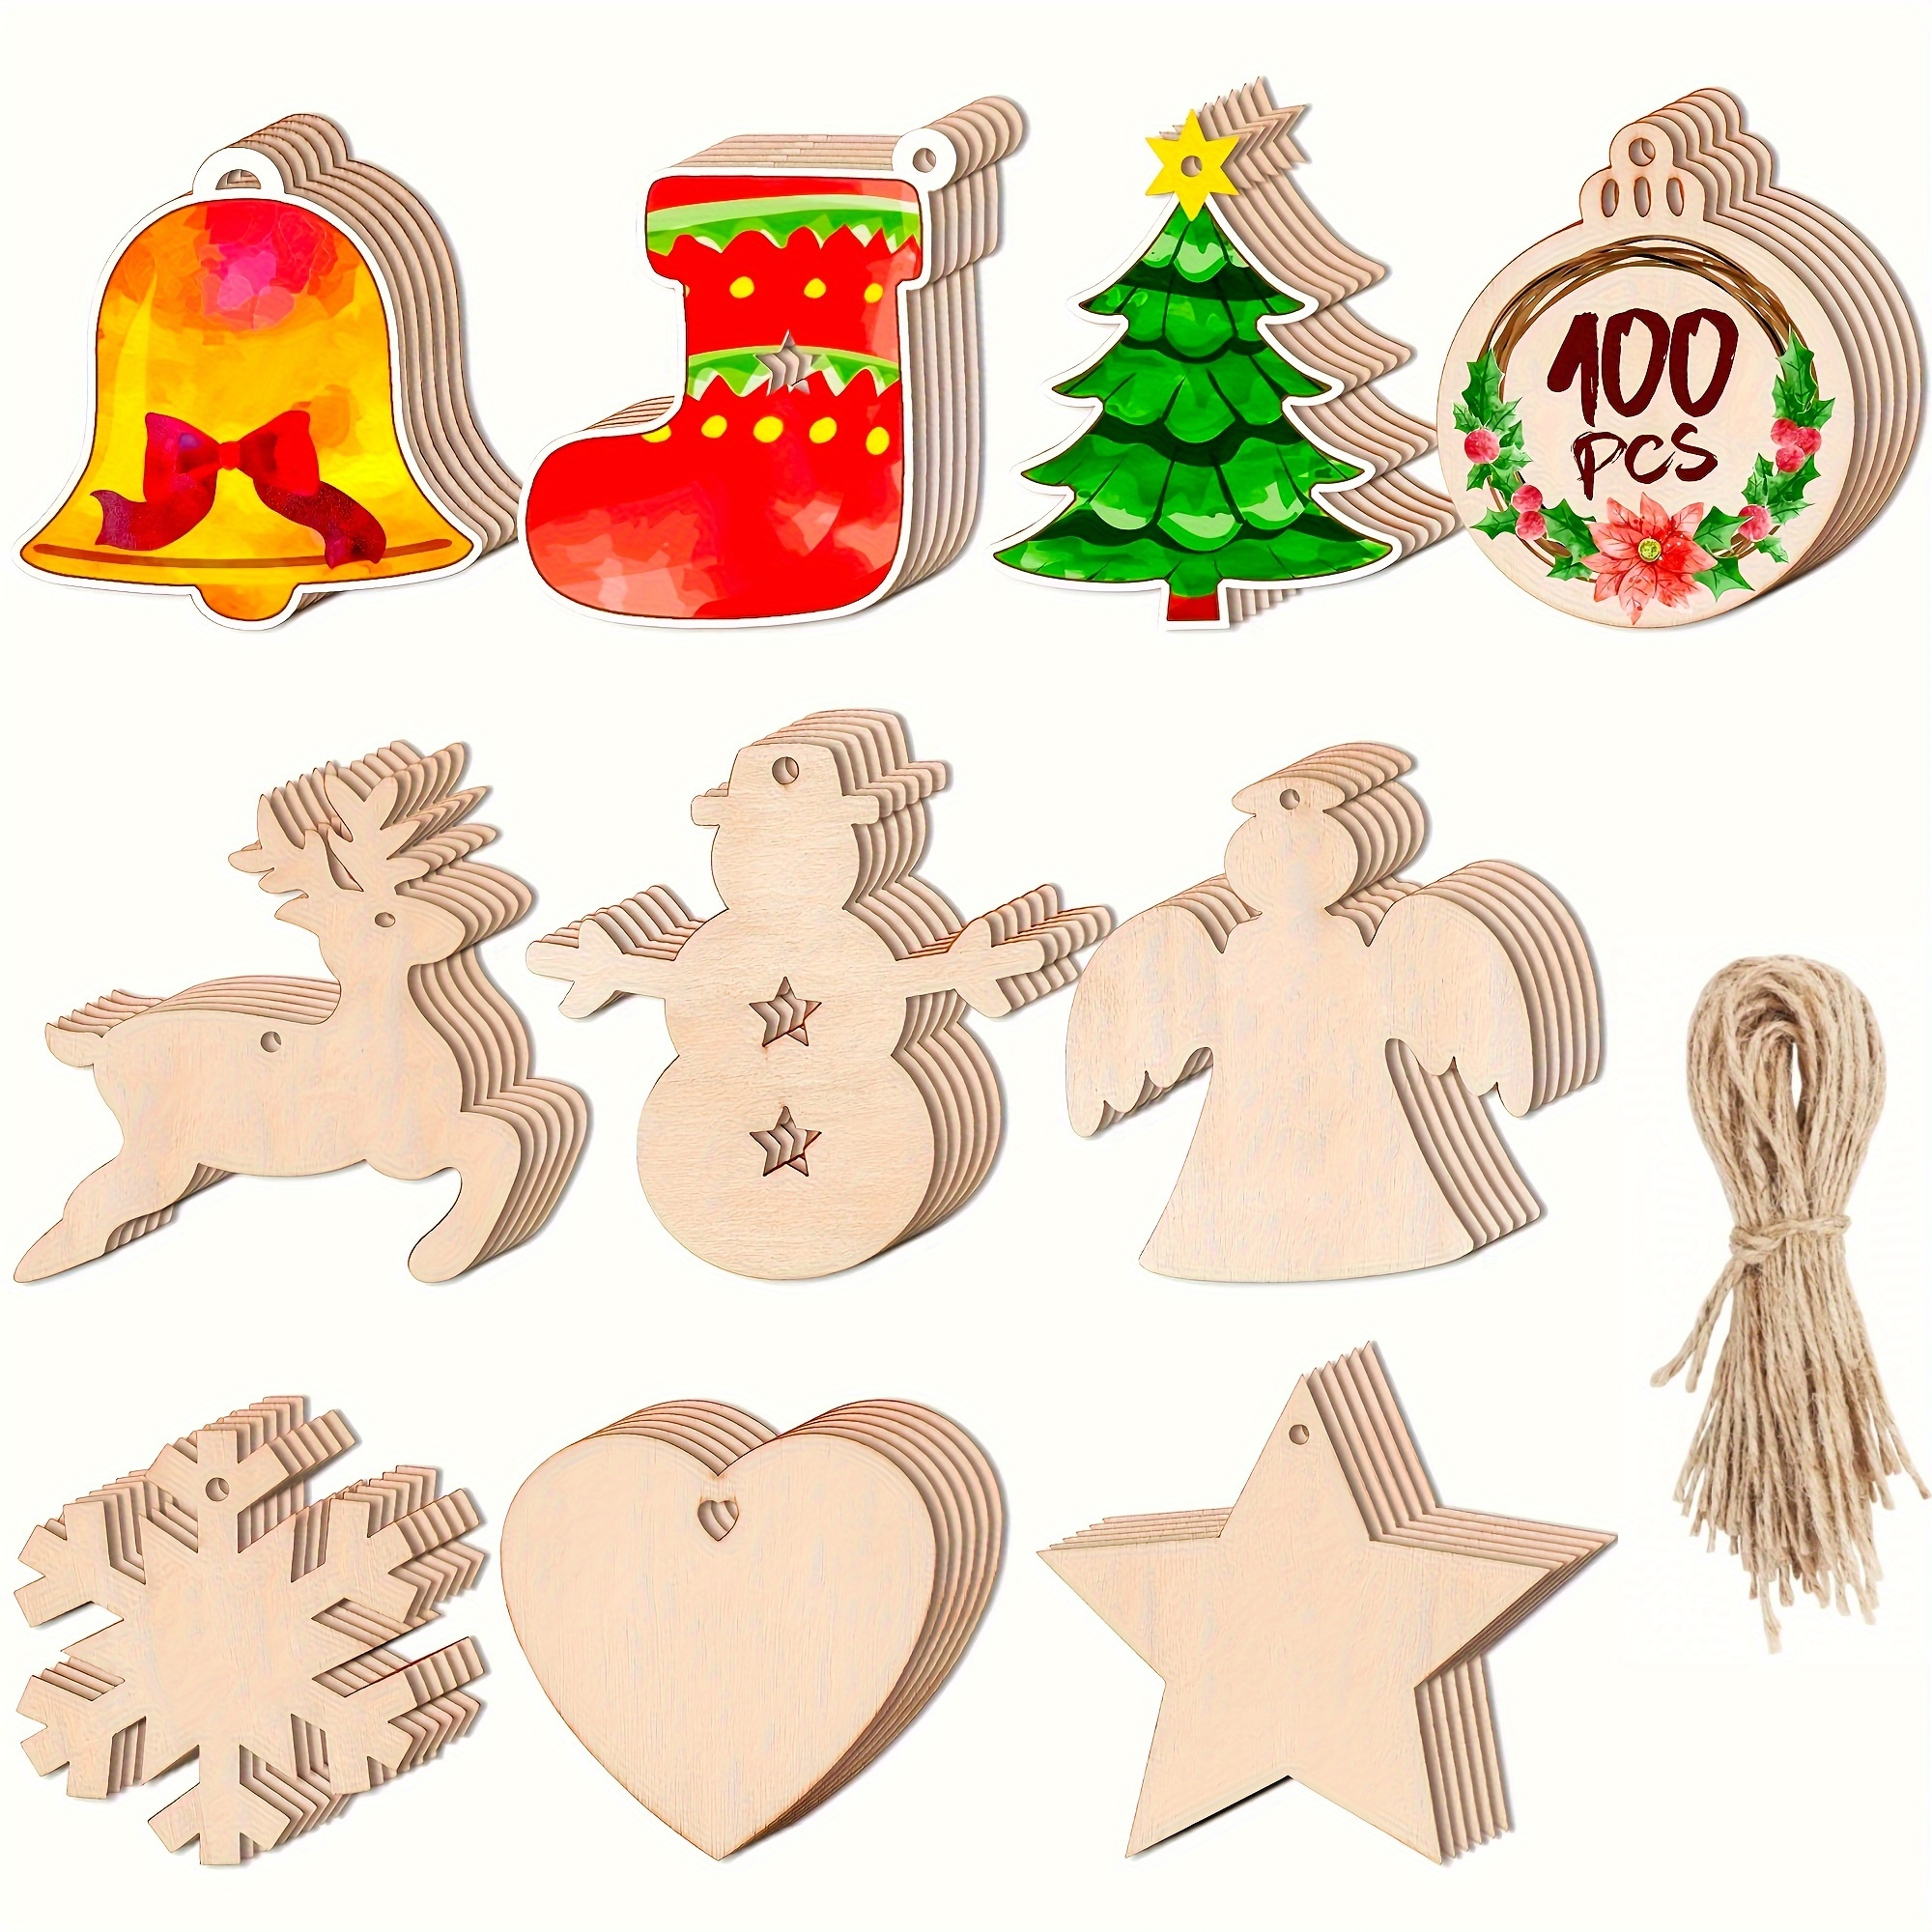 50 Pcs Wooden Christmas Ornaments Unfinished, Wood Slices for Crafts in 5 Styles with 10 Twine, DIY Wooden Christmas Ornaments Hanging Decorations